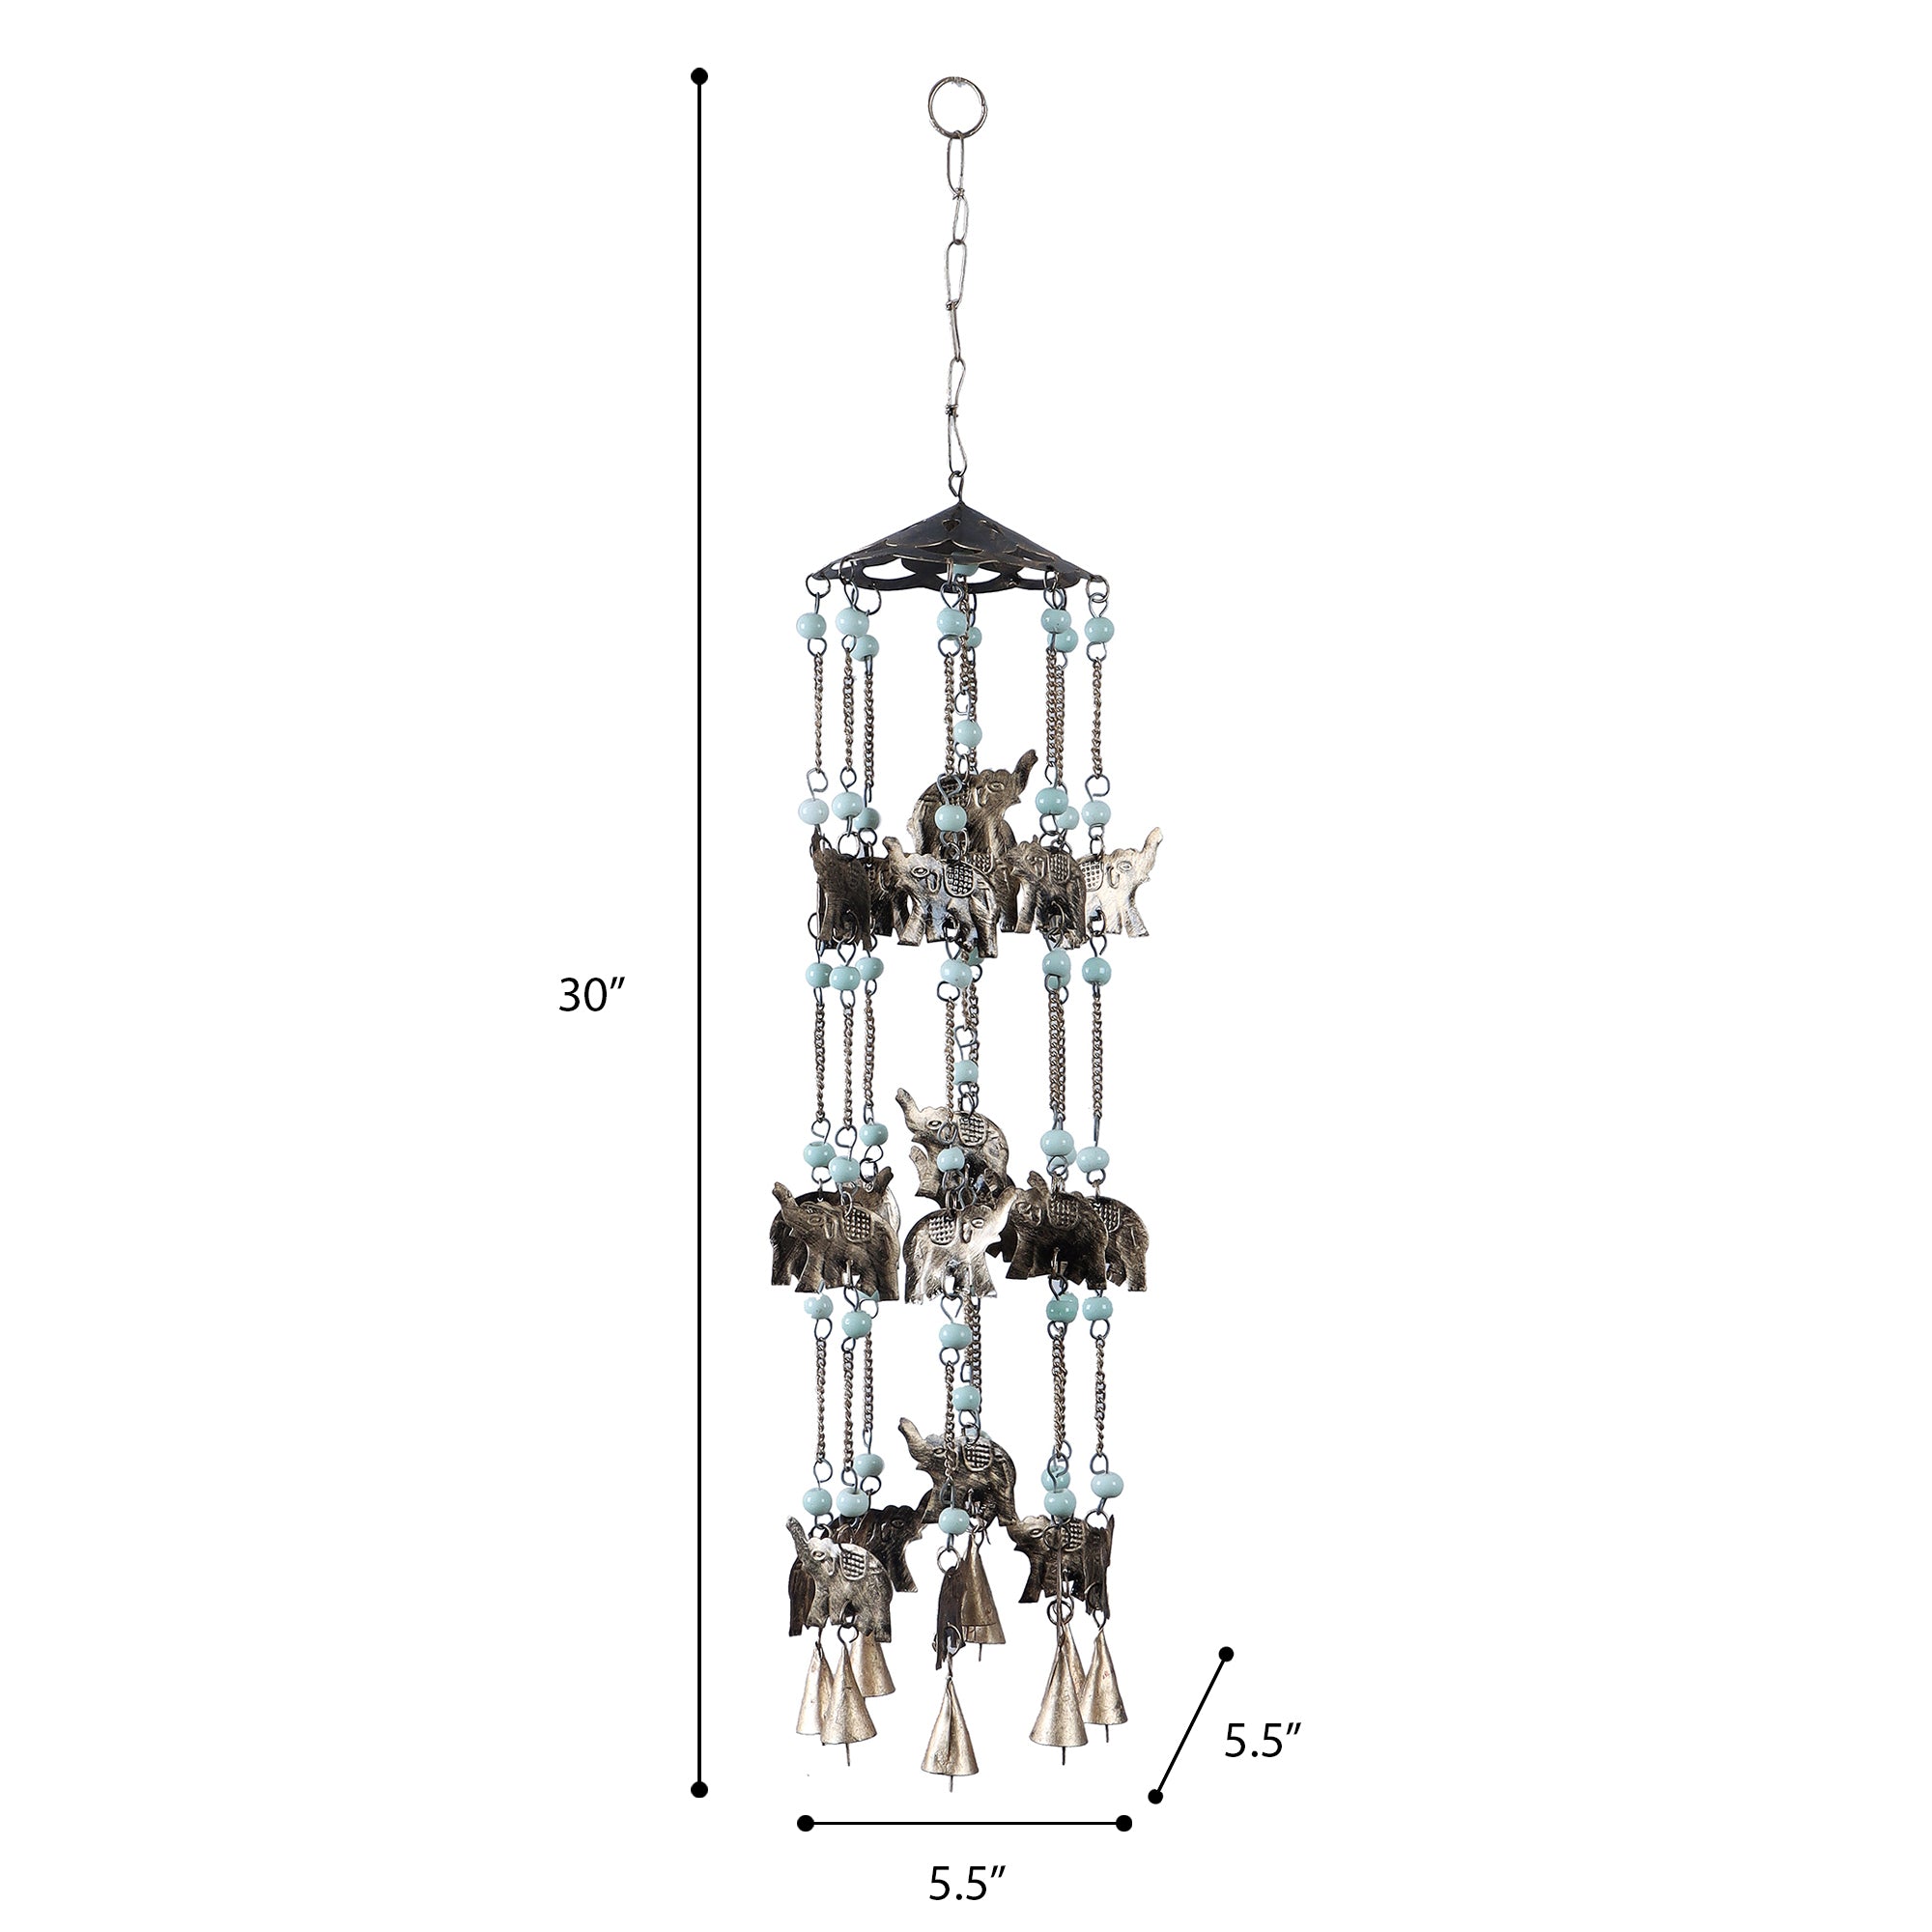 The Elephant Wind Chime